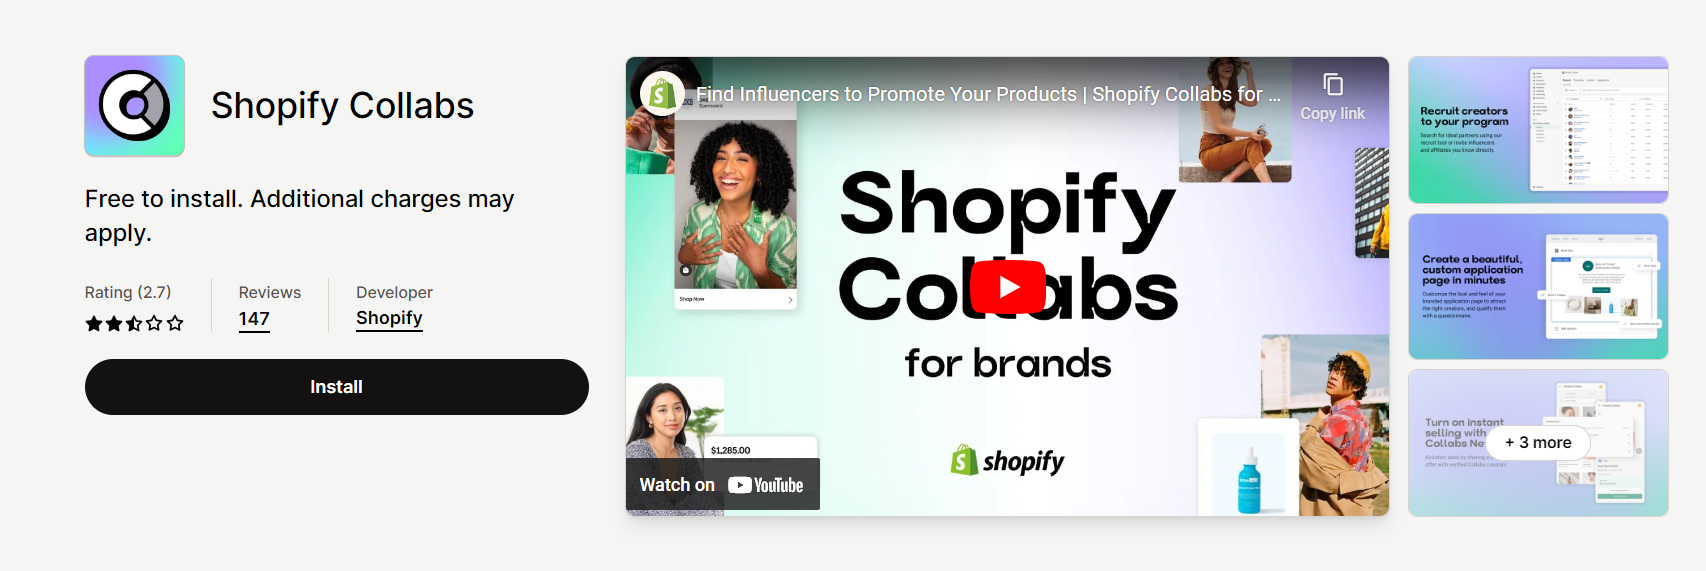 Shopify Collabs app